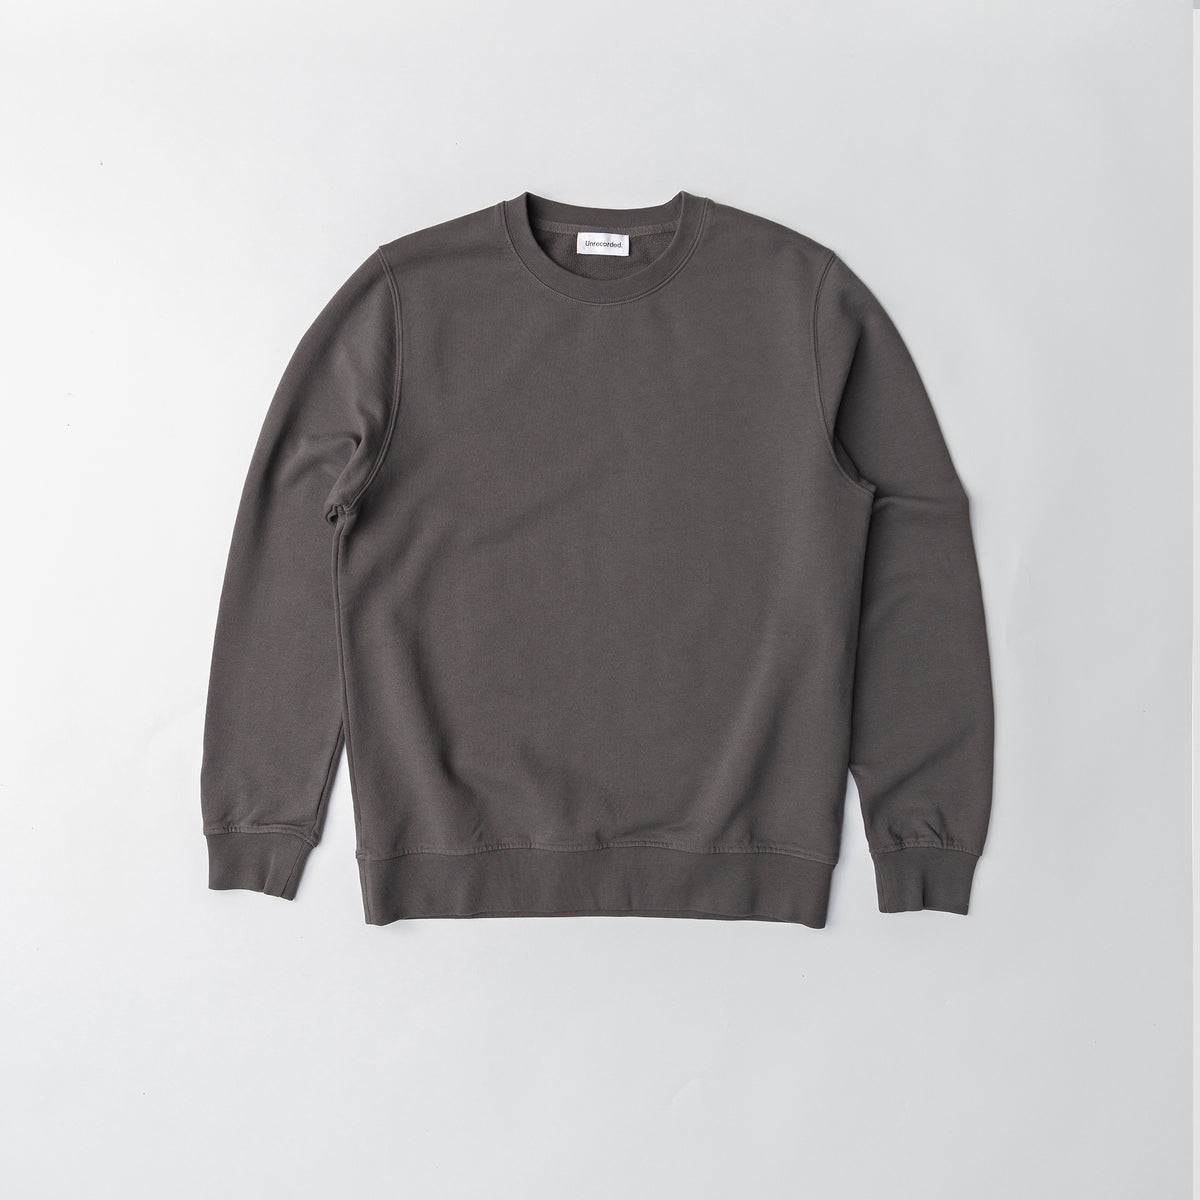 Sweater Charcoal made from Organic Cotton - Unrecorded - Front Women - Front Men